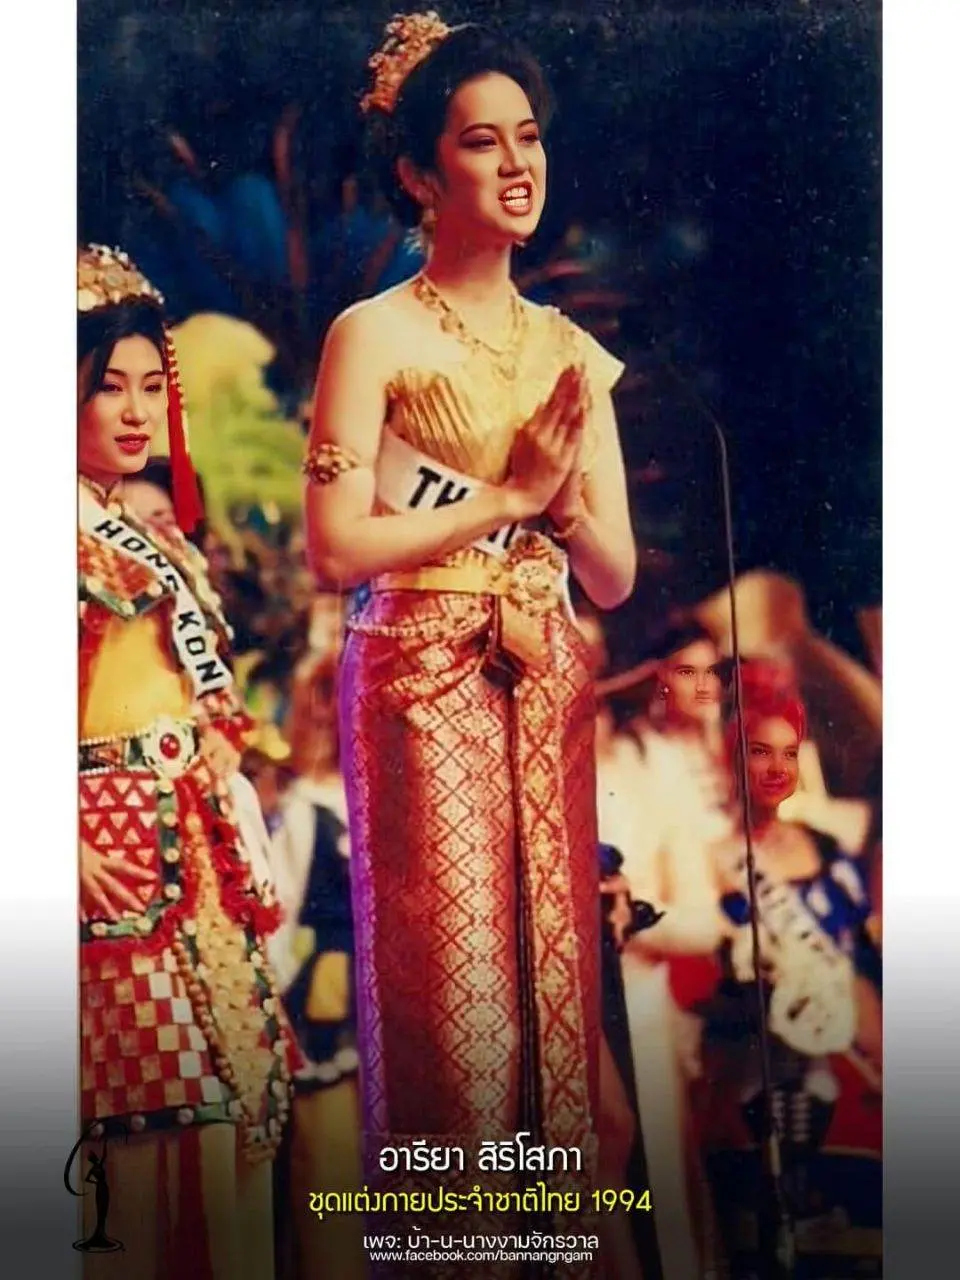 THAILAND 🇹🇭 | Thai national costume by MUT